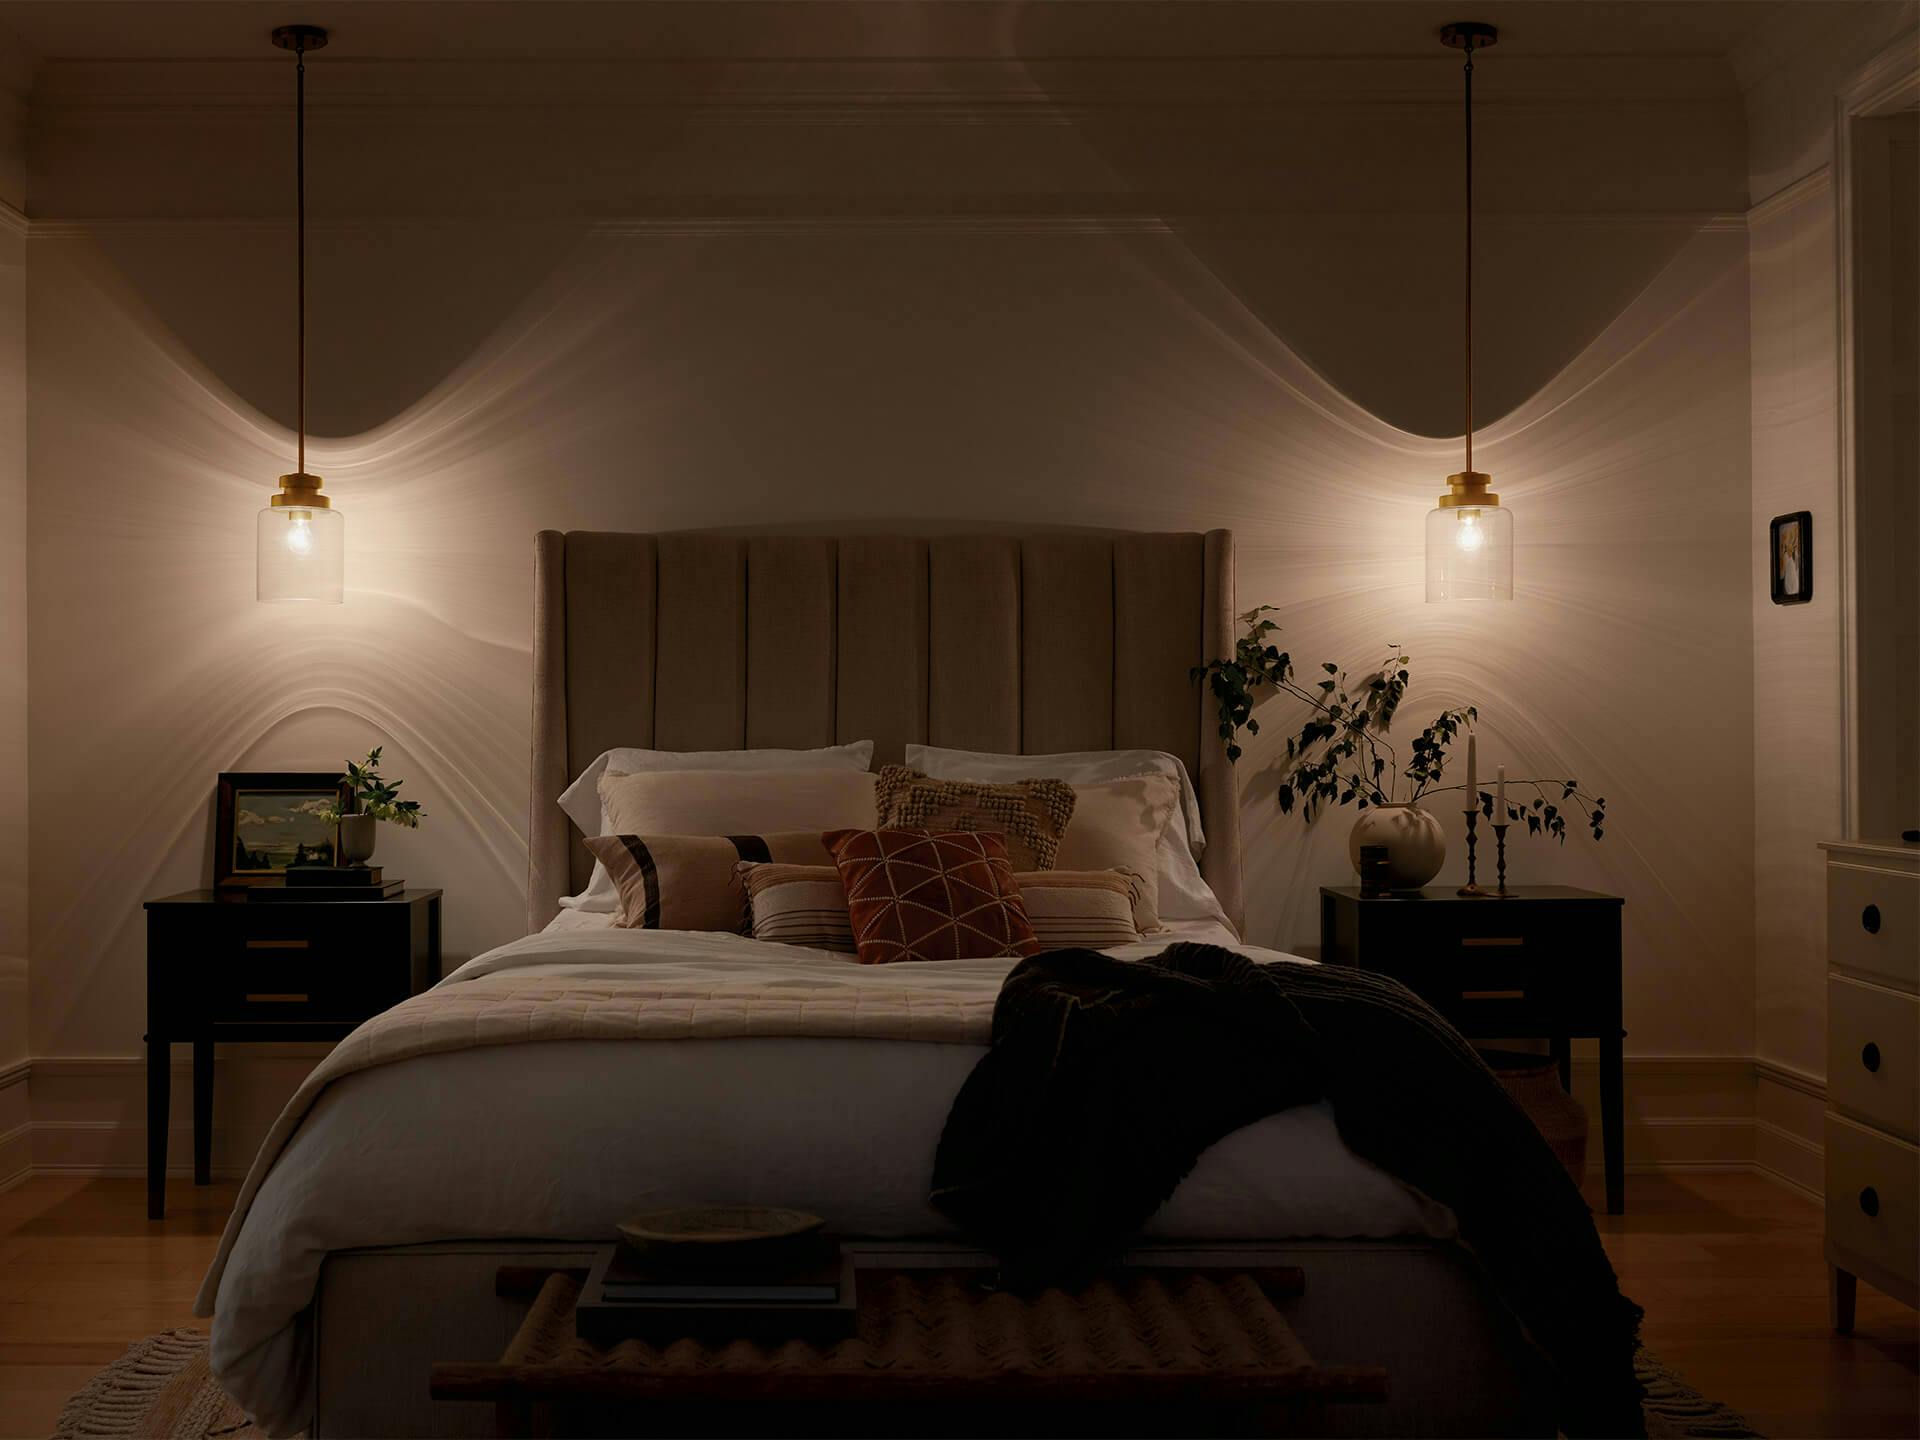 Bedroom at night with Annabeth pendants